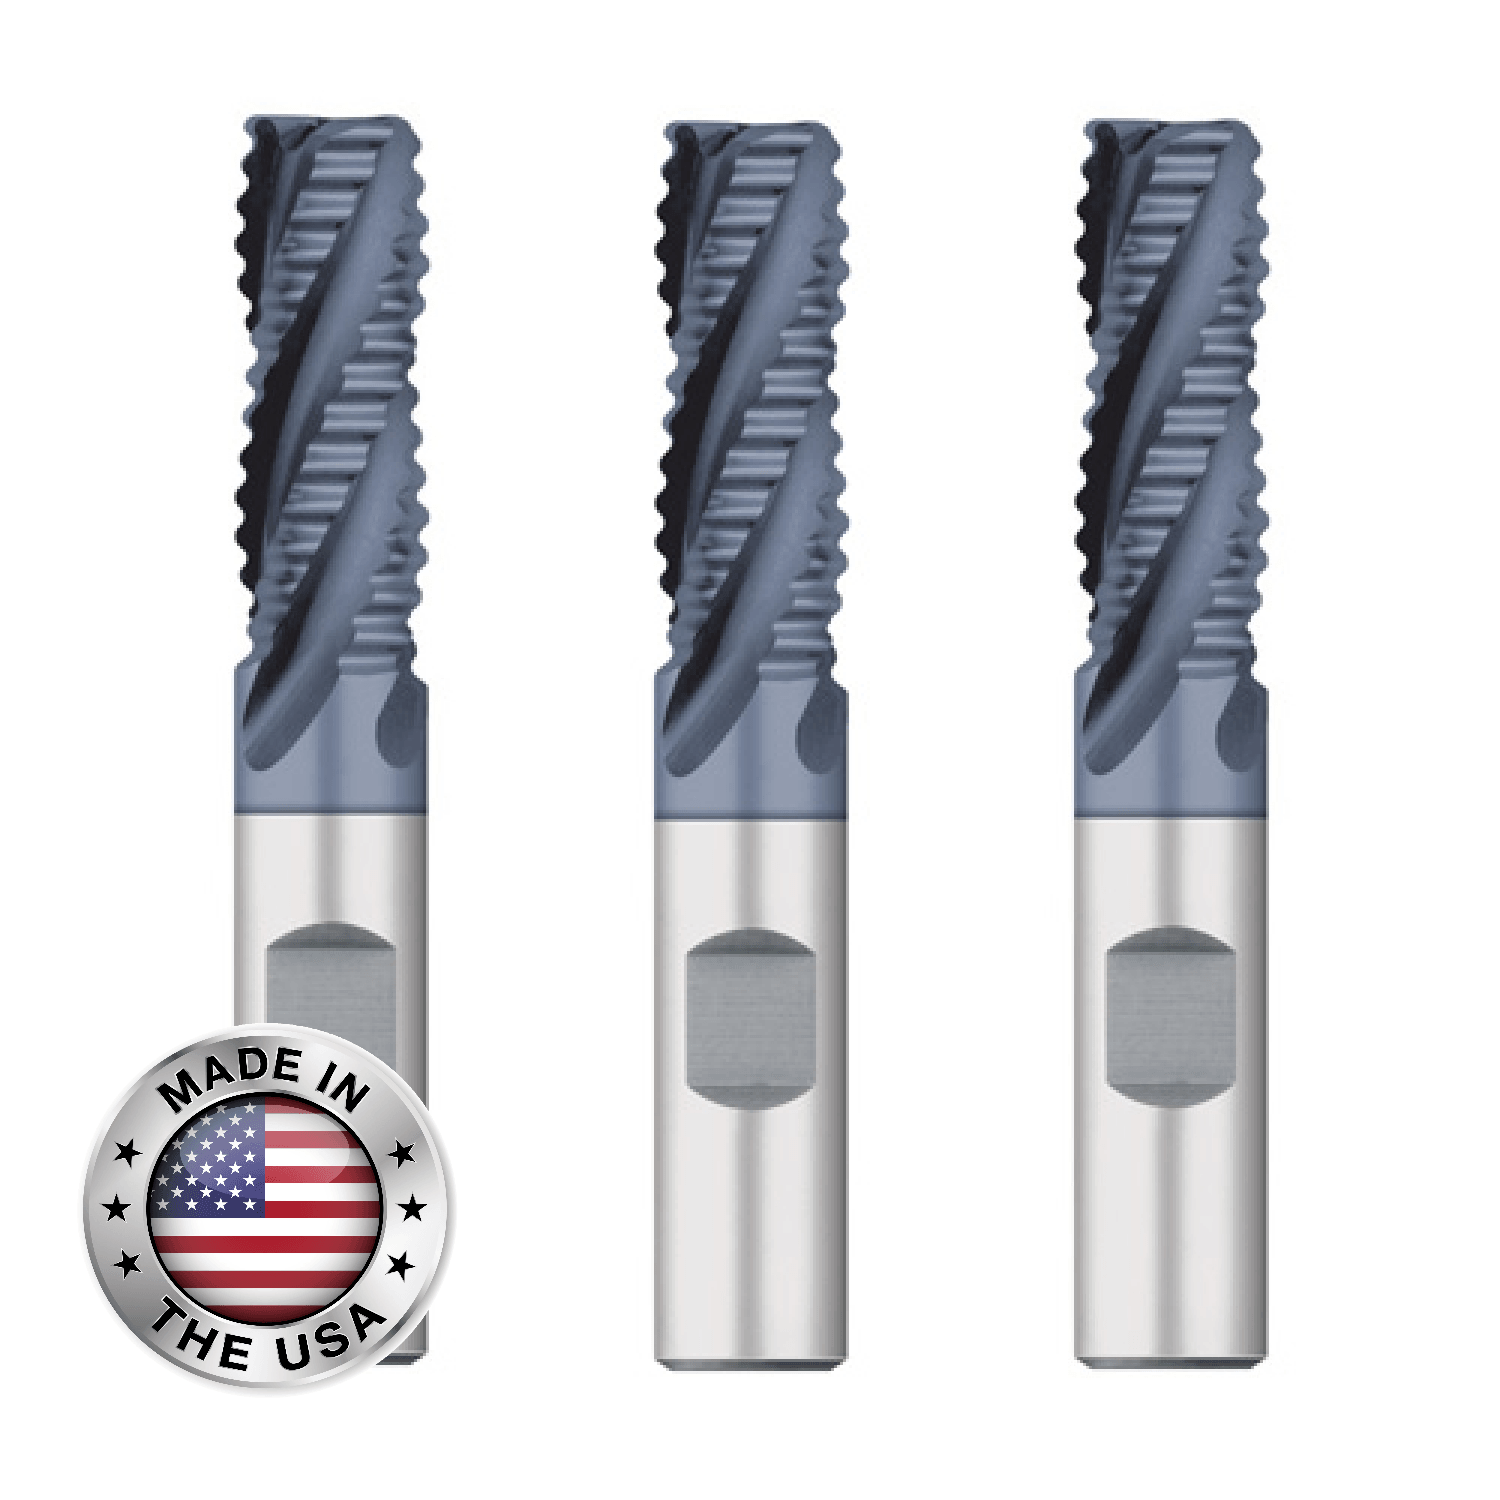 (3 Pack) 1/2" x 1-1/4" LOC Course Pitch Cobalt 4 Flute Roughing End Mills - The End Mill Store 